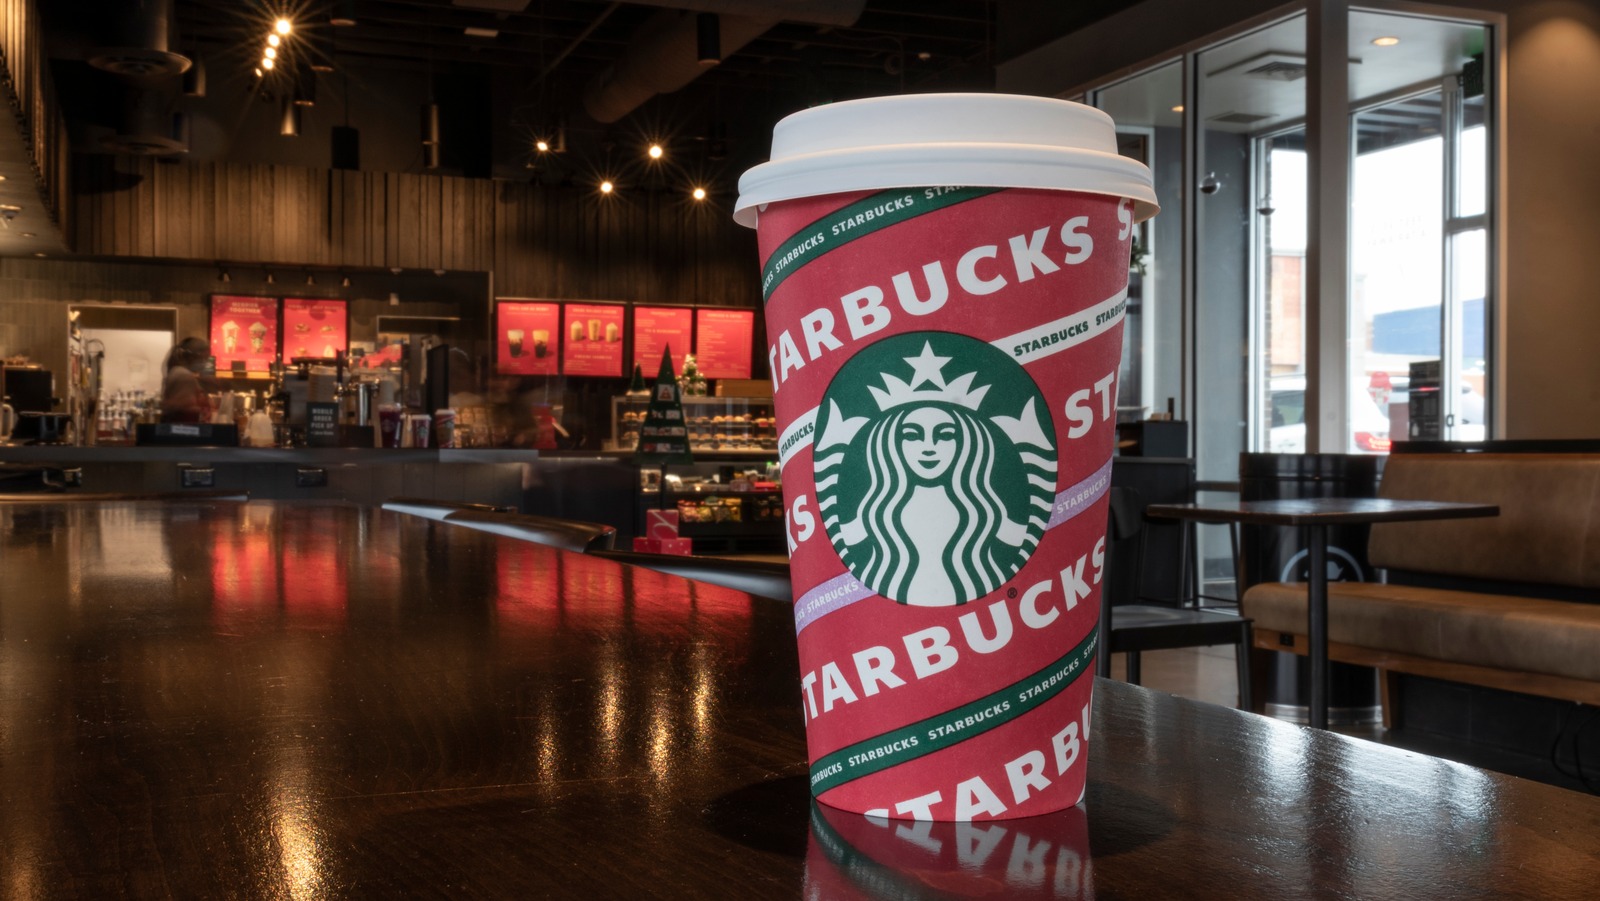 https://www.tastingtable.com/img/gallery/starbucks-2022-holiday-menu-may-have-just-been-leaked/l-intro-1664572972.jpg